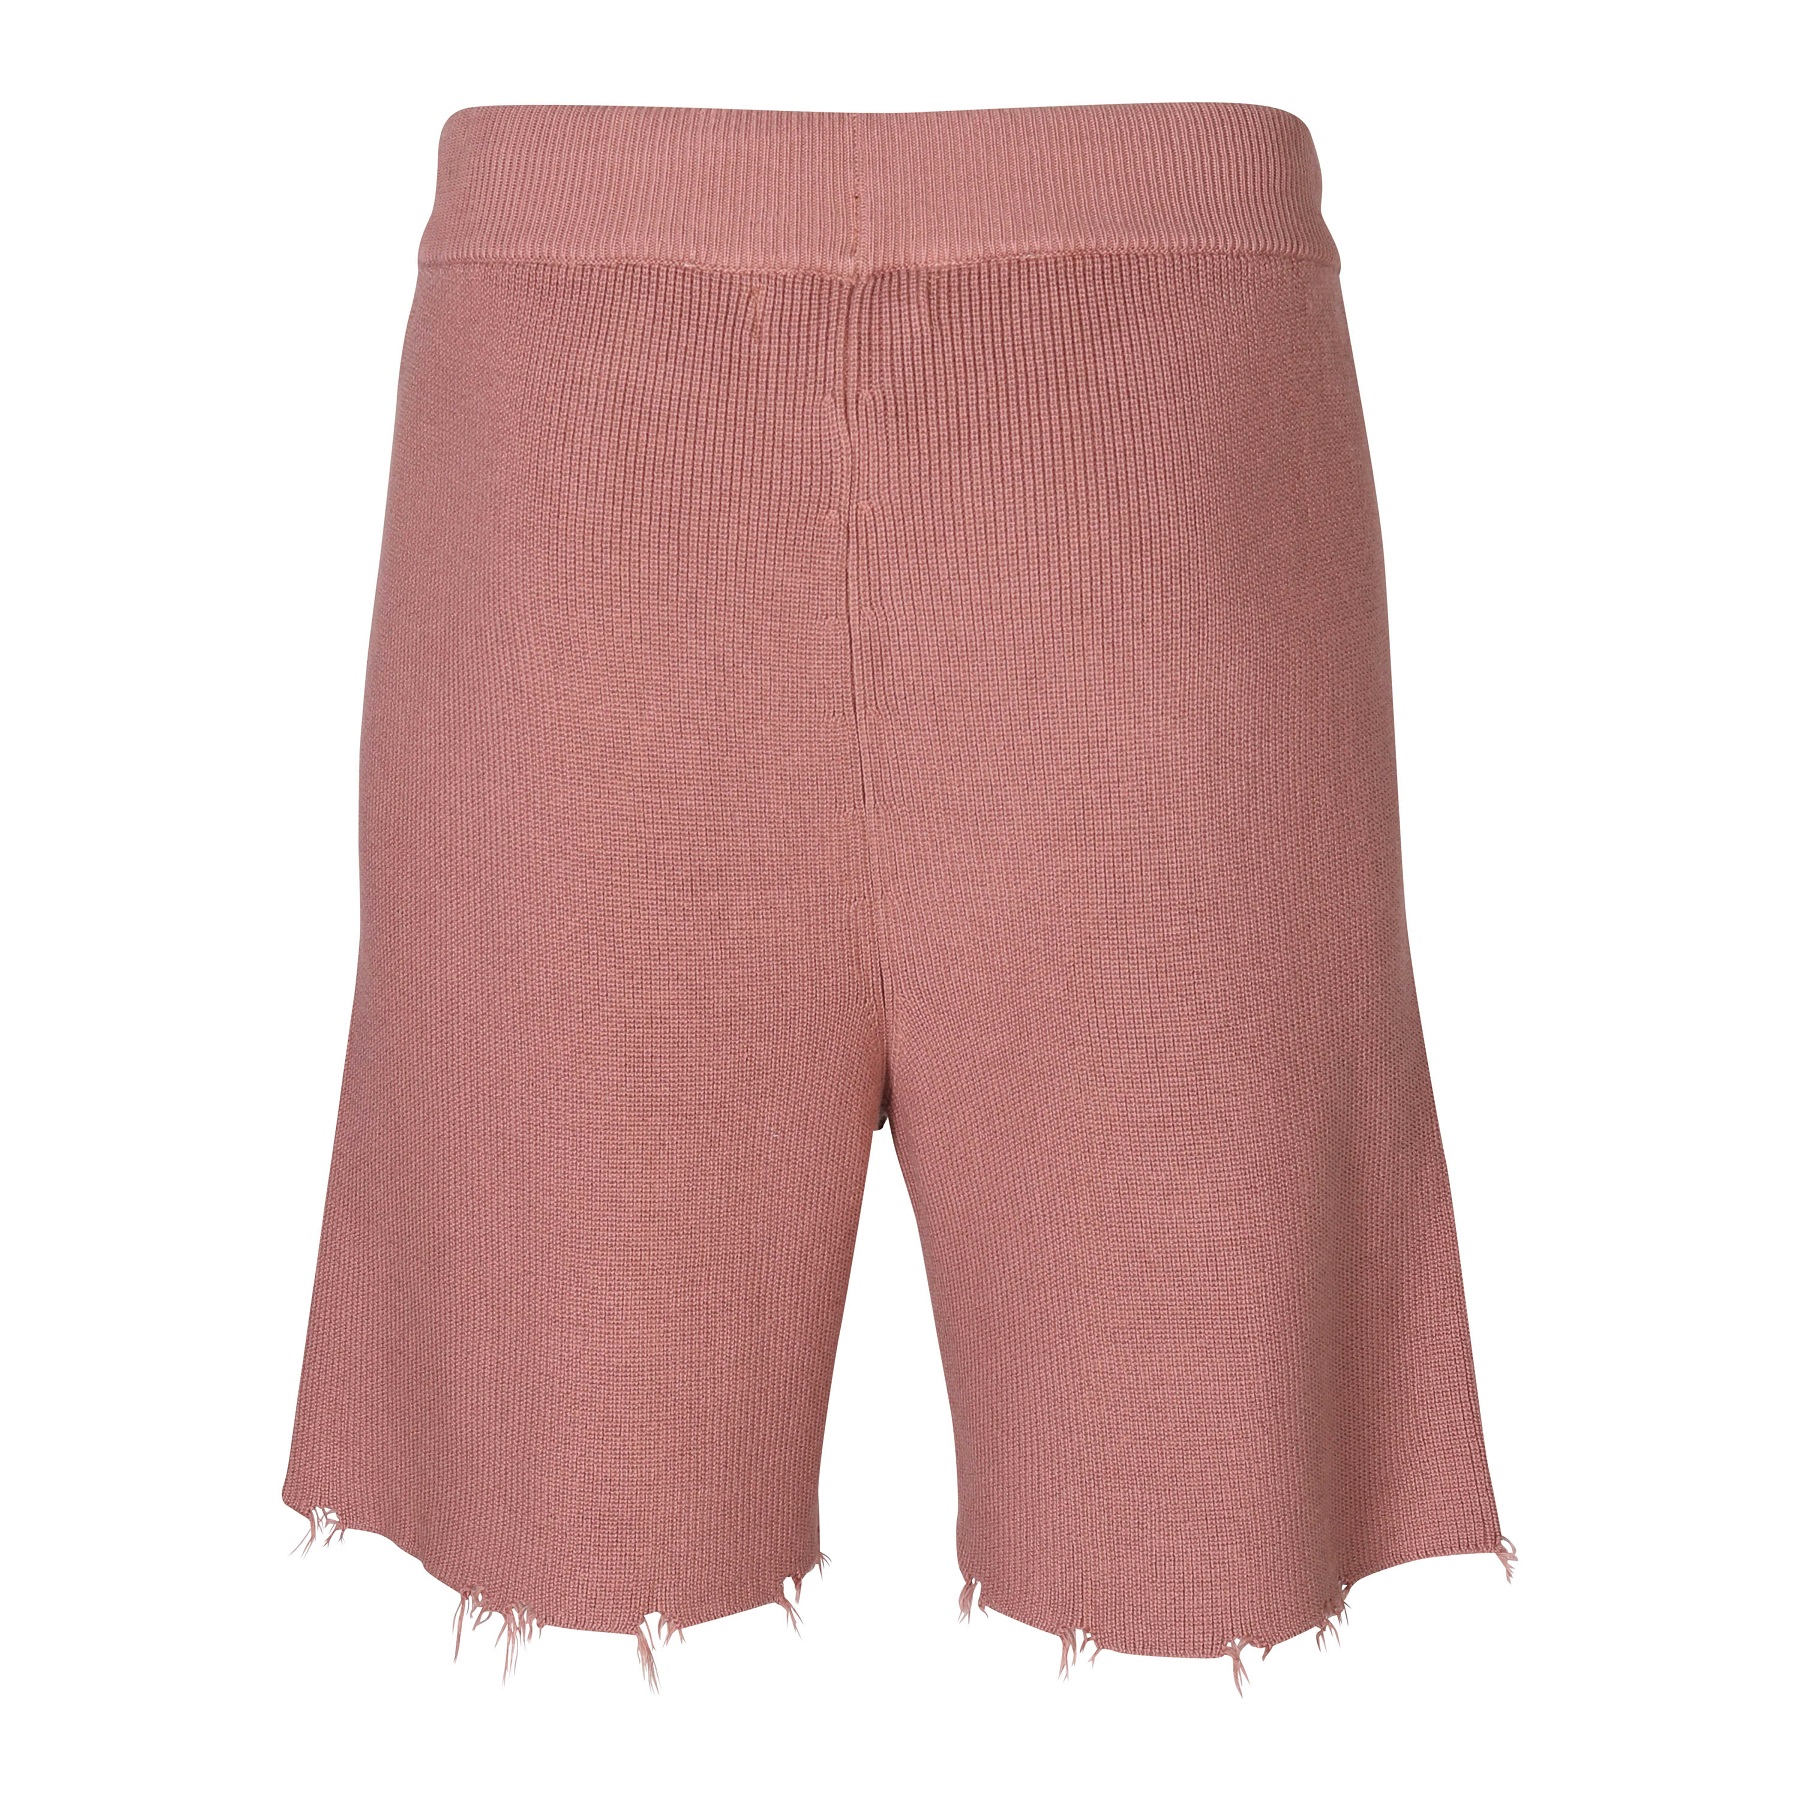 LANEUS Breaks Cotton Knit Shorts in Glace